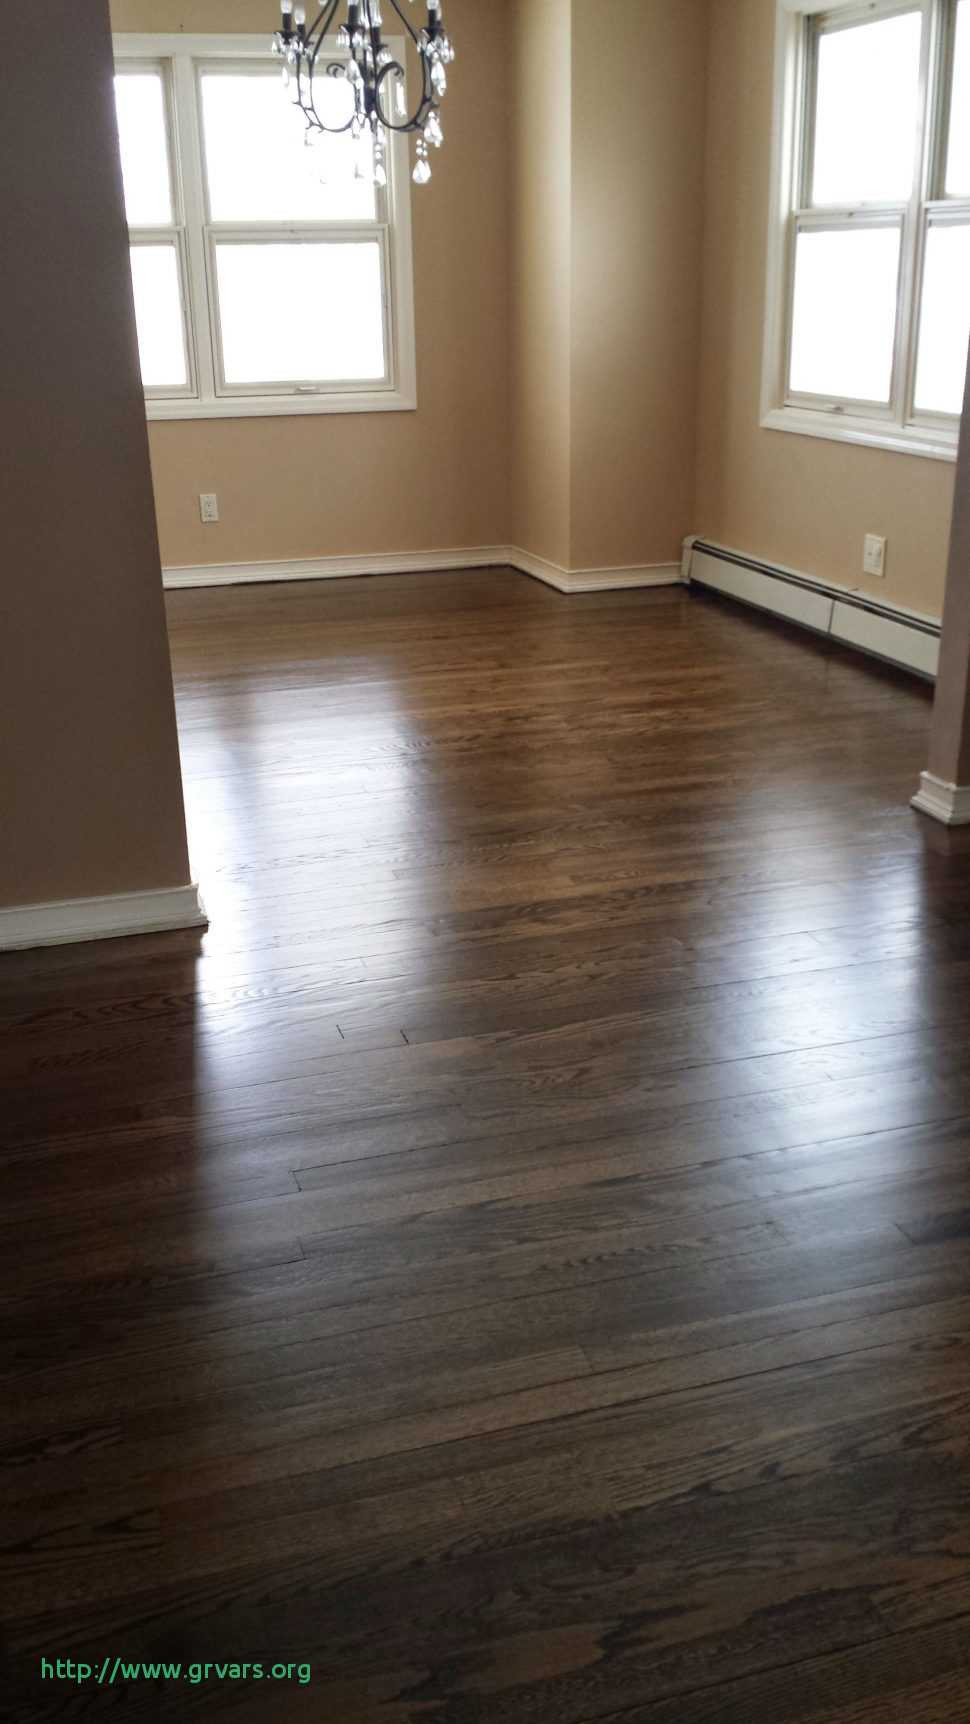 19 attractive Sanding Hardwood Floors by Hand 2024 free download sanding hardwood floors by hand of 21 nouveau how much does it cost to have hardwood floors refinished in interior amusing refinishingod floors diy network refinish parquet without sanding b